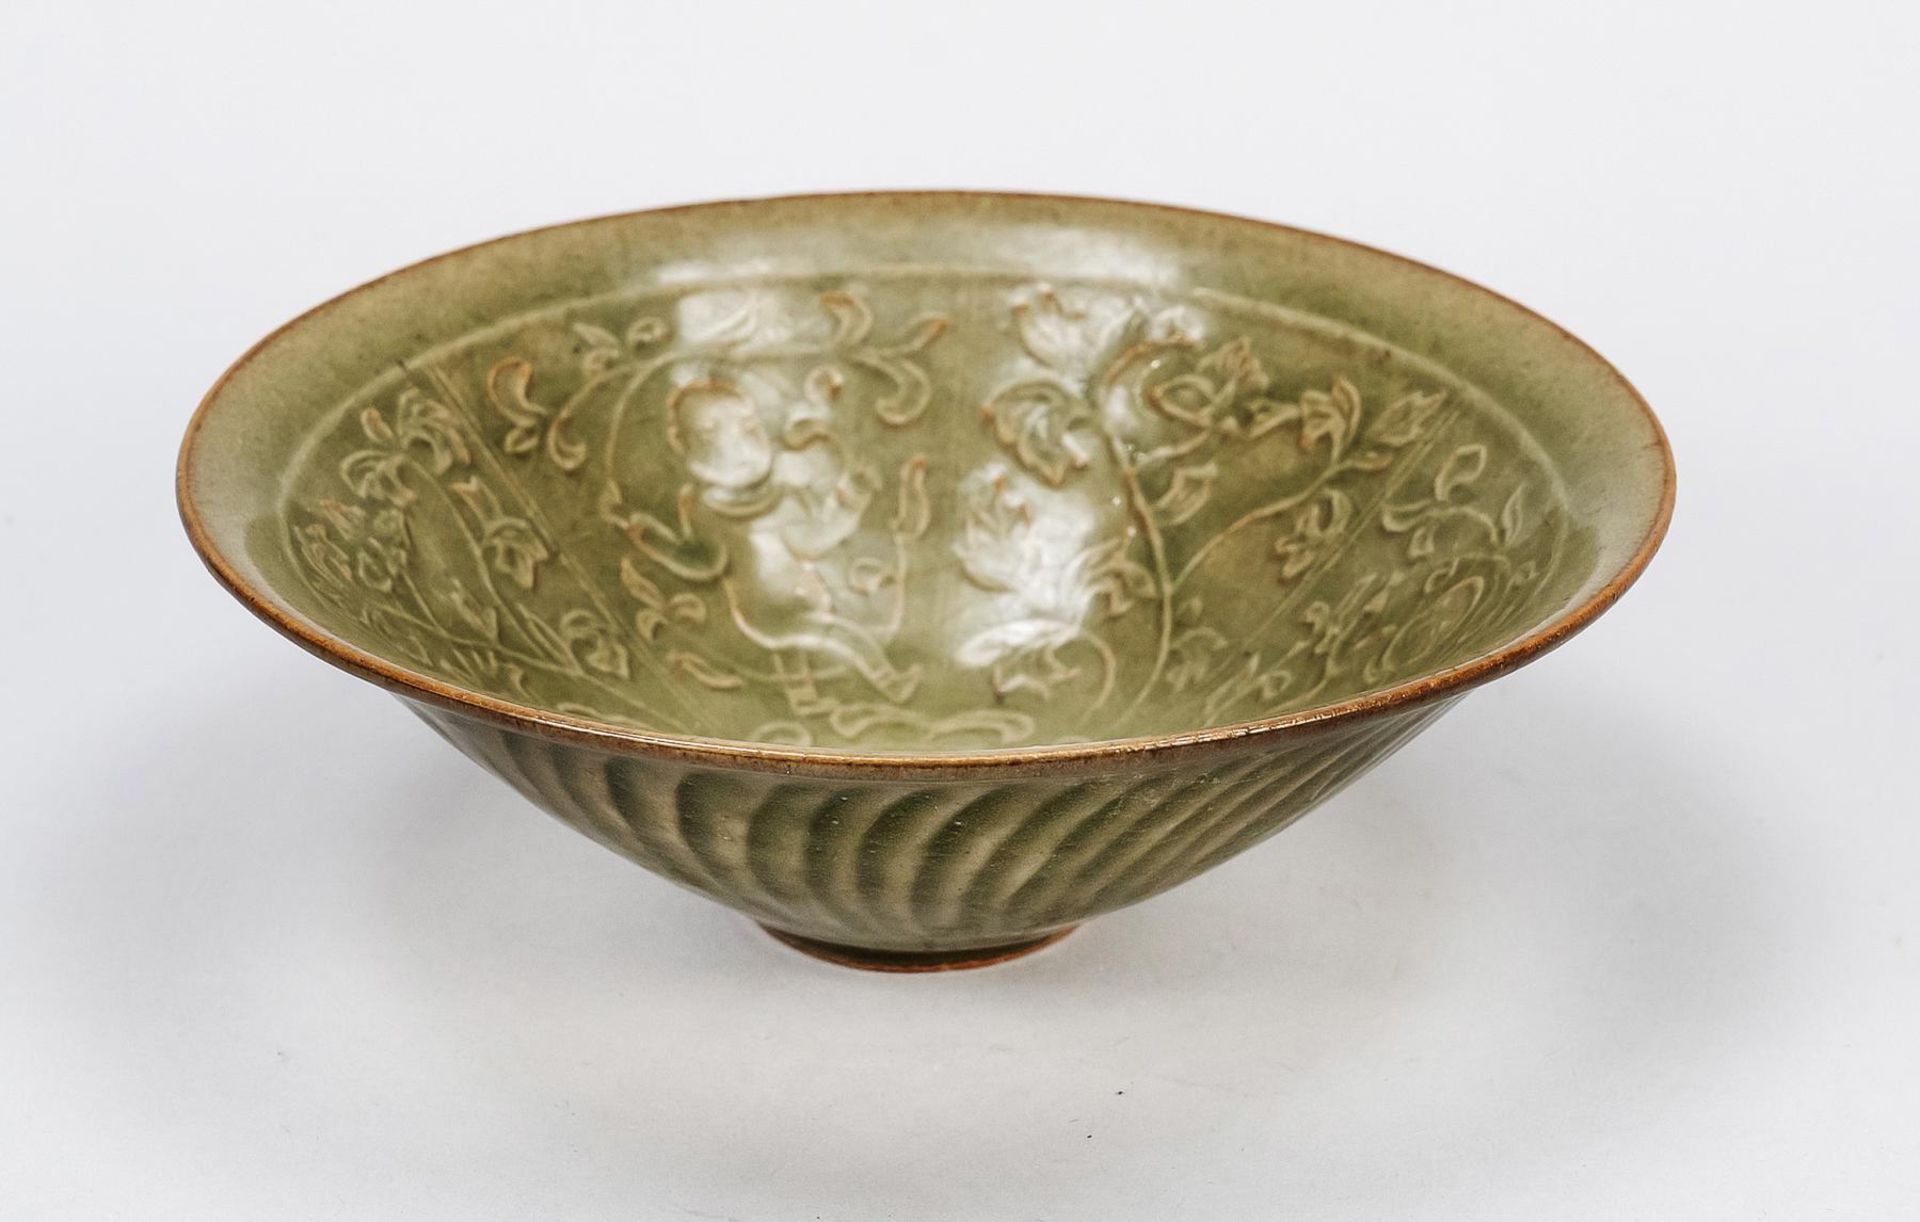 Large Yaozhouyao bowl, China, Song dynasty(960-1368) 12th century or later, conical stoneware bowl